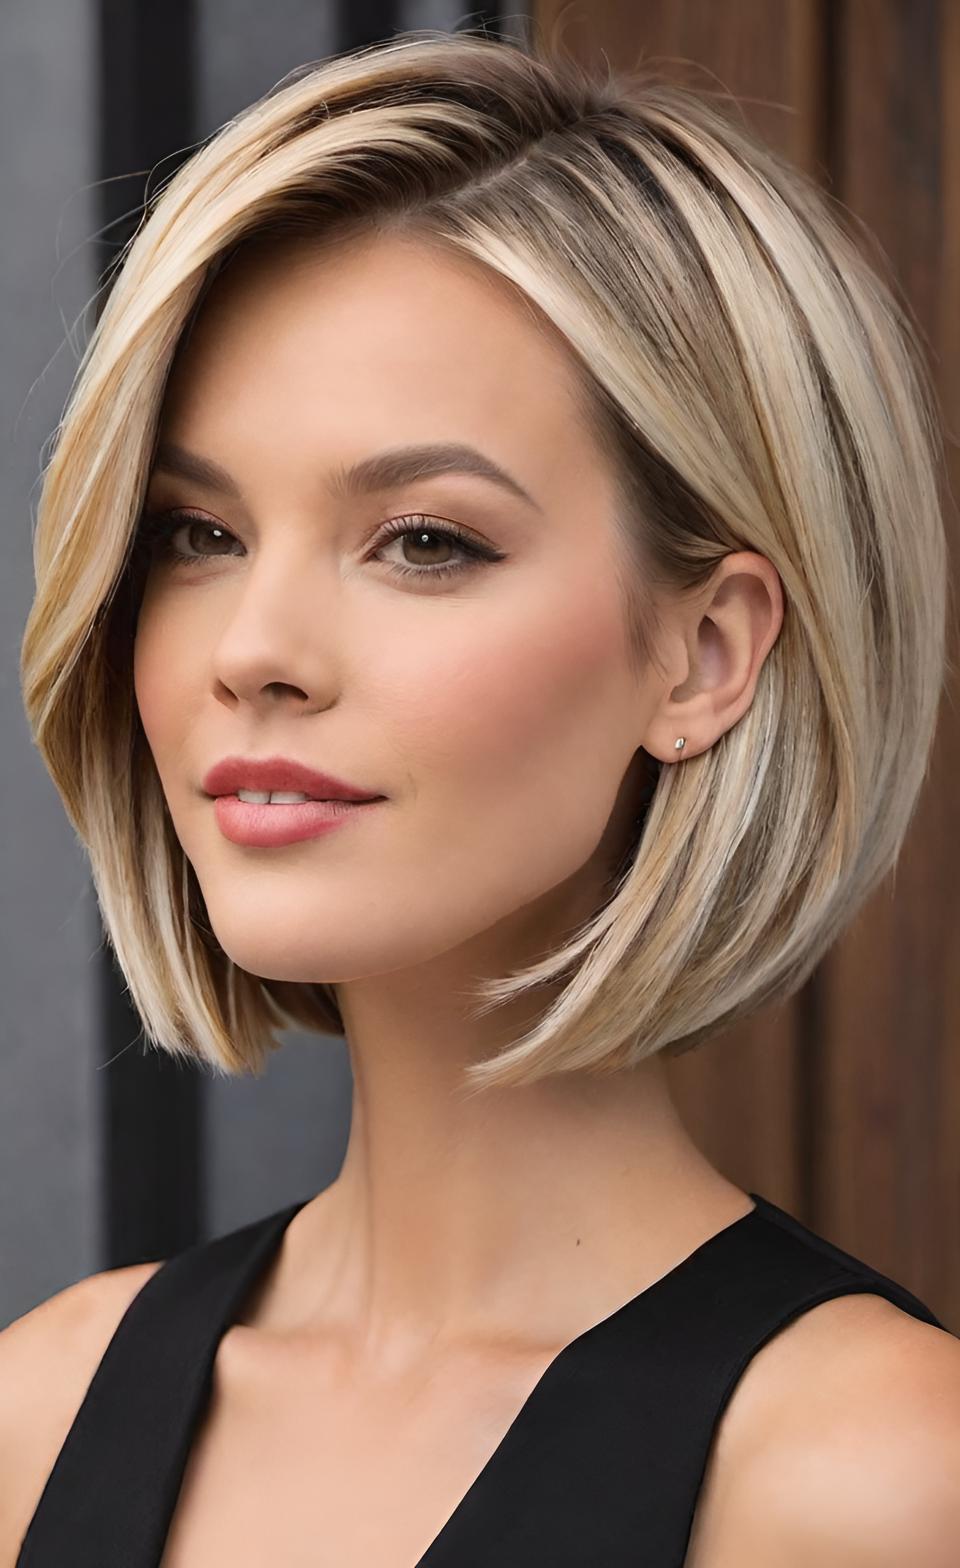 Chin Length Haircuts: Chic Styles for a Trendy Look In